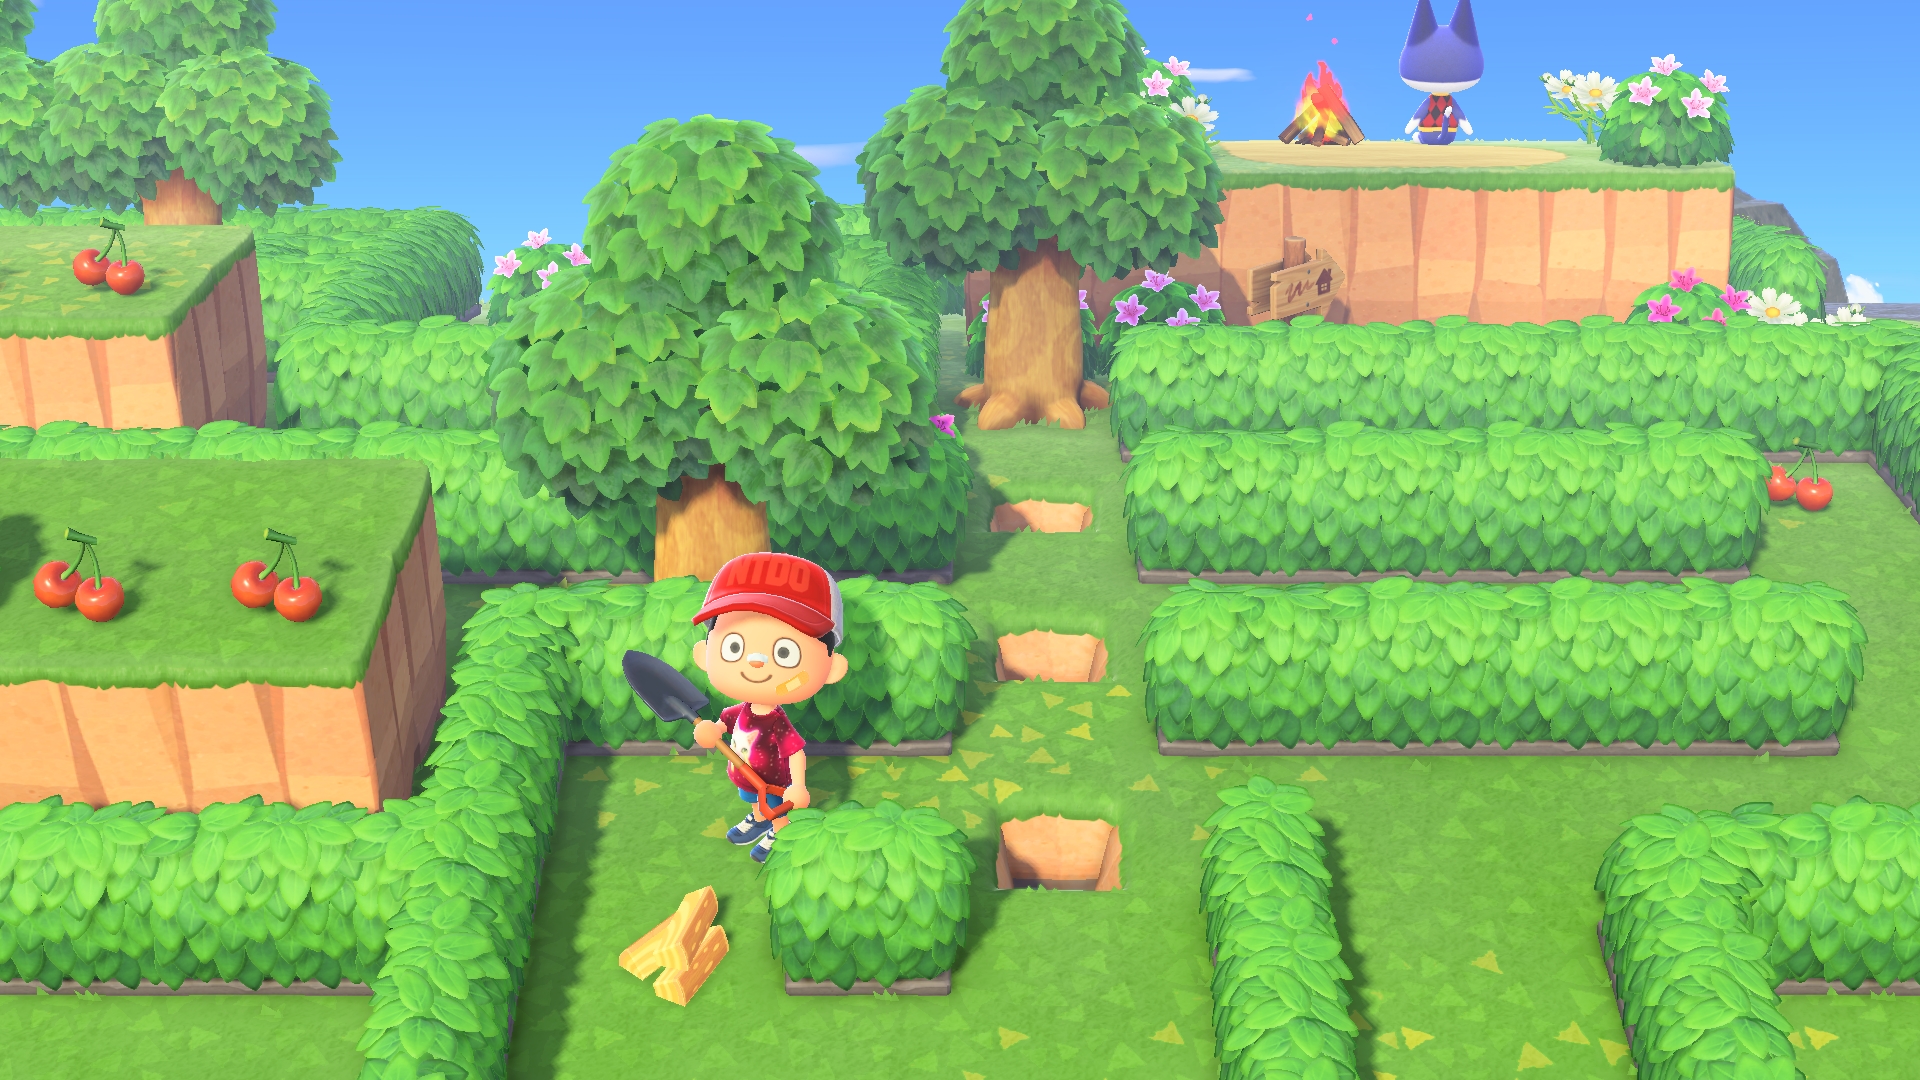 Maze May 1, 2021 at the animal crossing, how to do it?  – Brick Flip